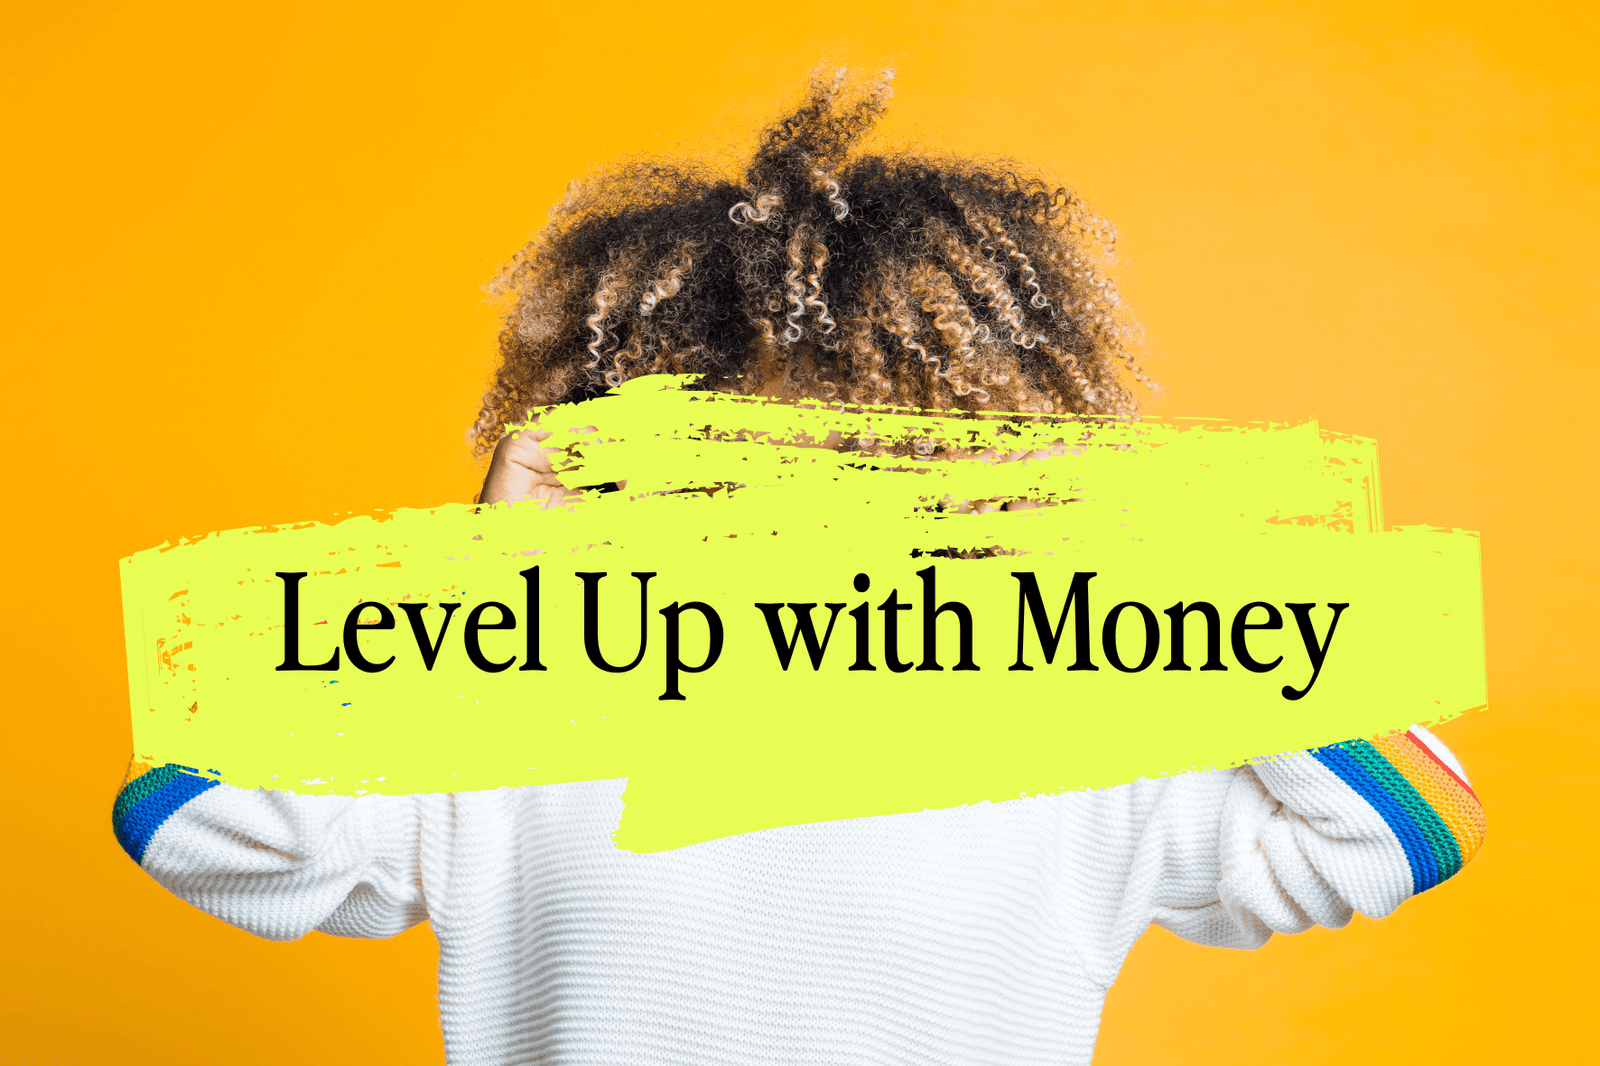 Level Up with Money